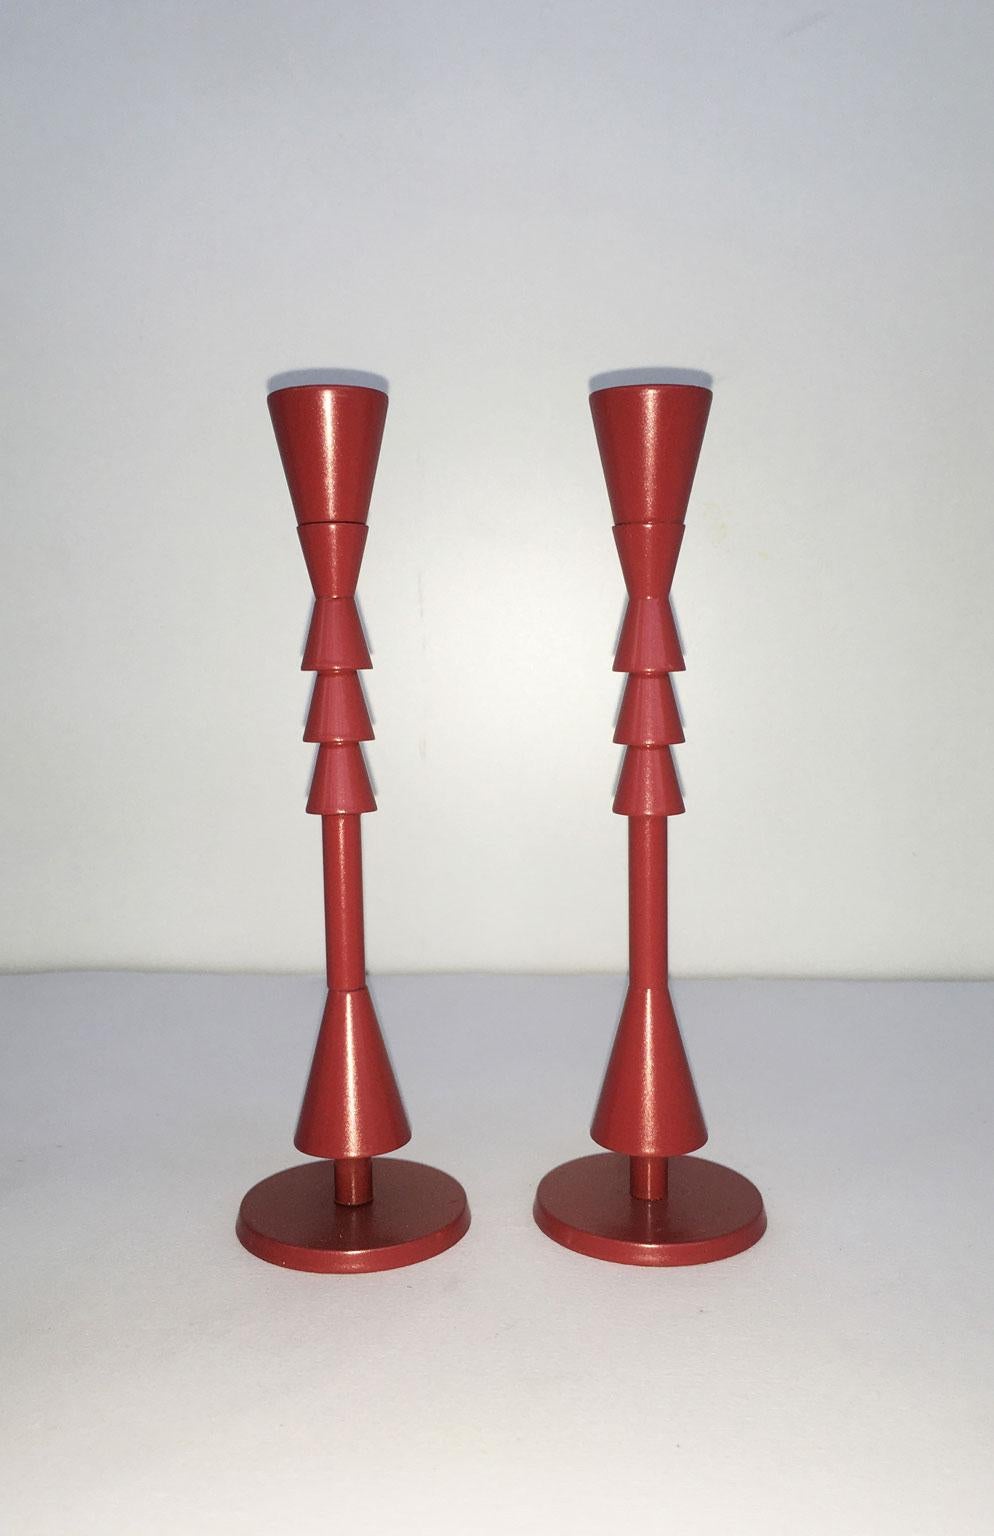 1974 Italy  Ugo La Pietra Ad Arte Red Bronze Abstract Sculpture Candleholders For Sale 13